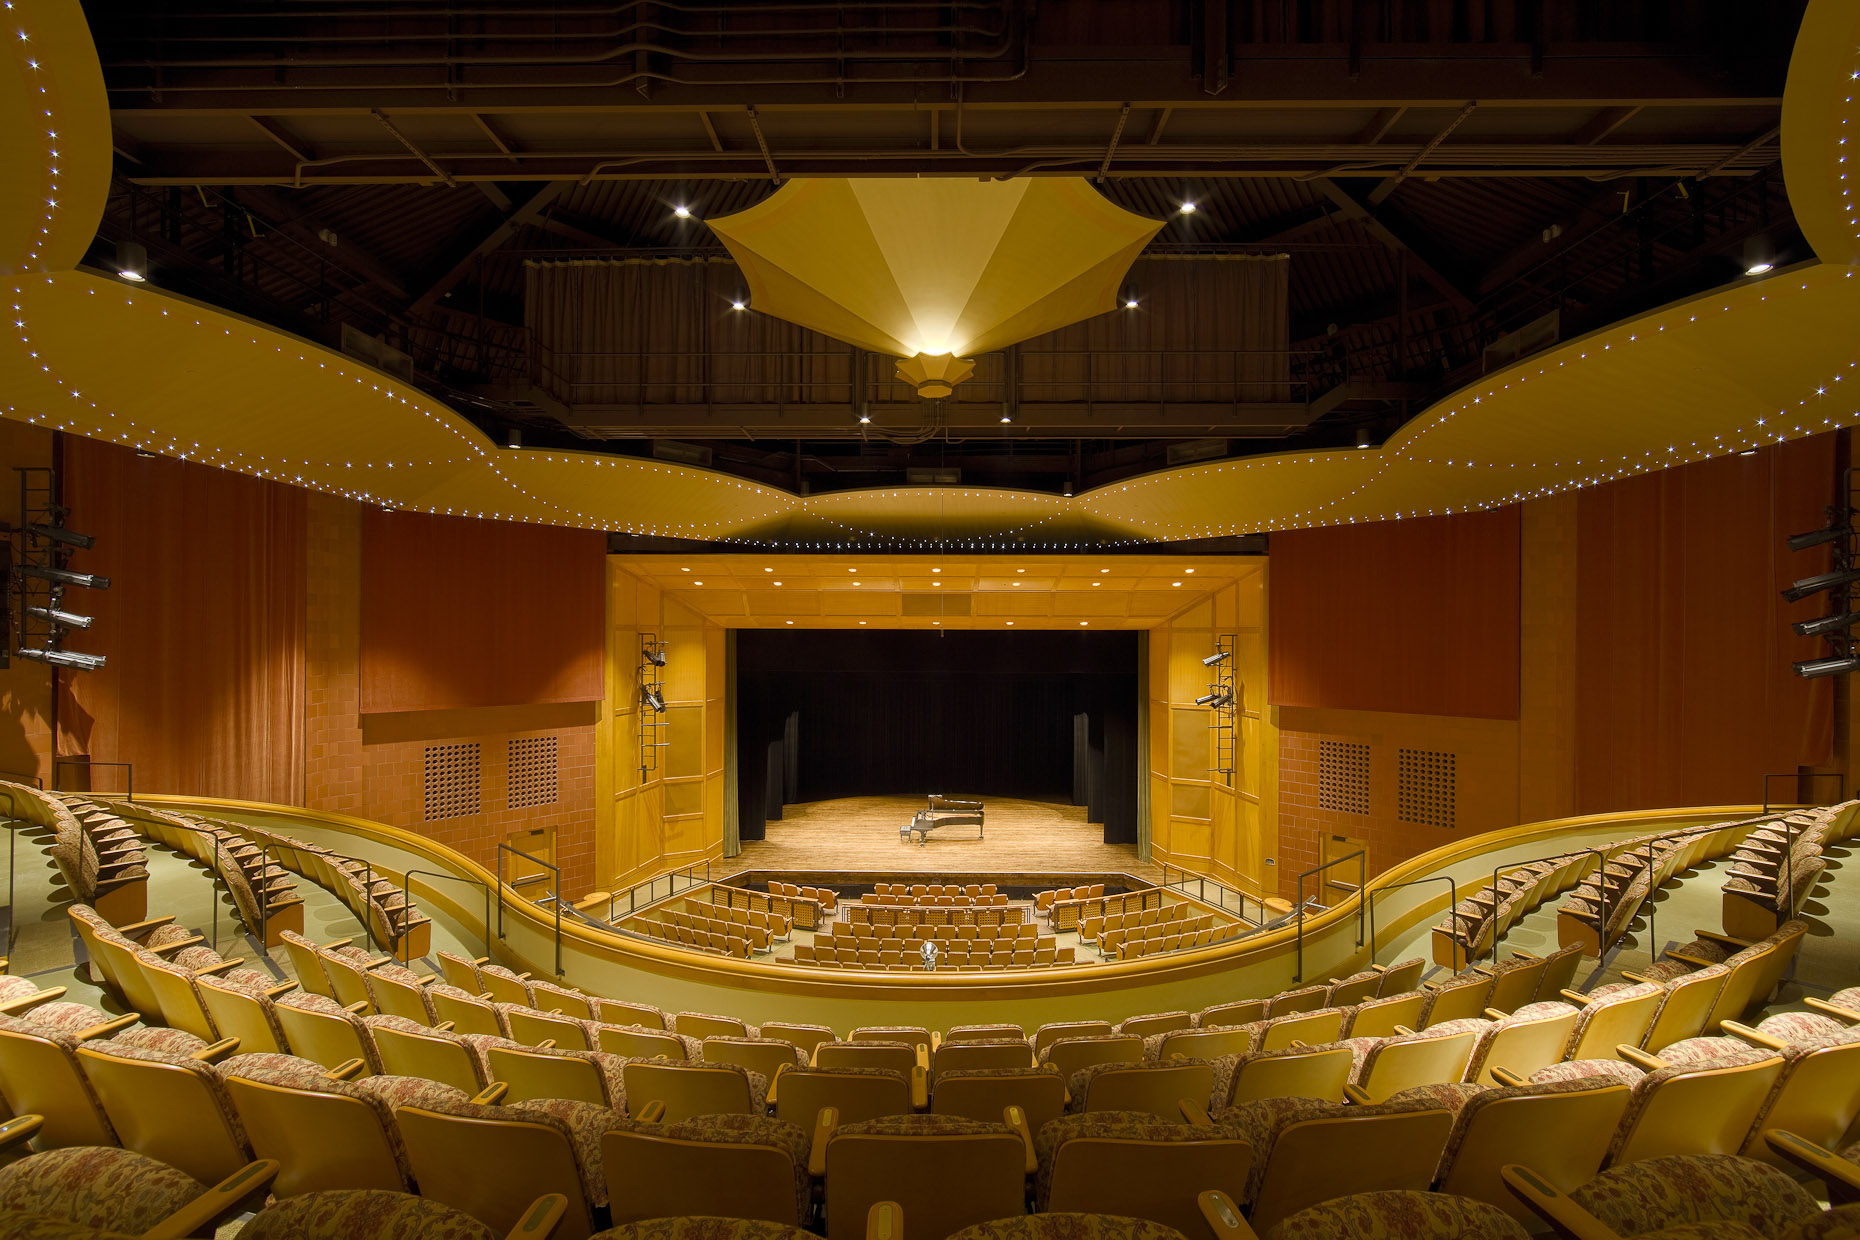 McCoy Center for the Performing Arts by Westlake Reed Leskosky photographed by Brad Feinknopf based in Columbus, Ohio